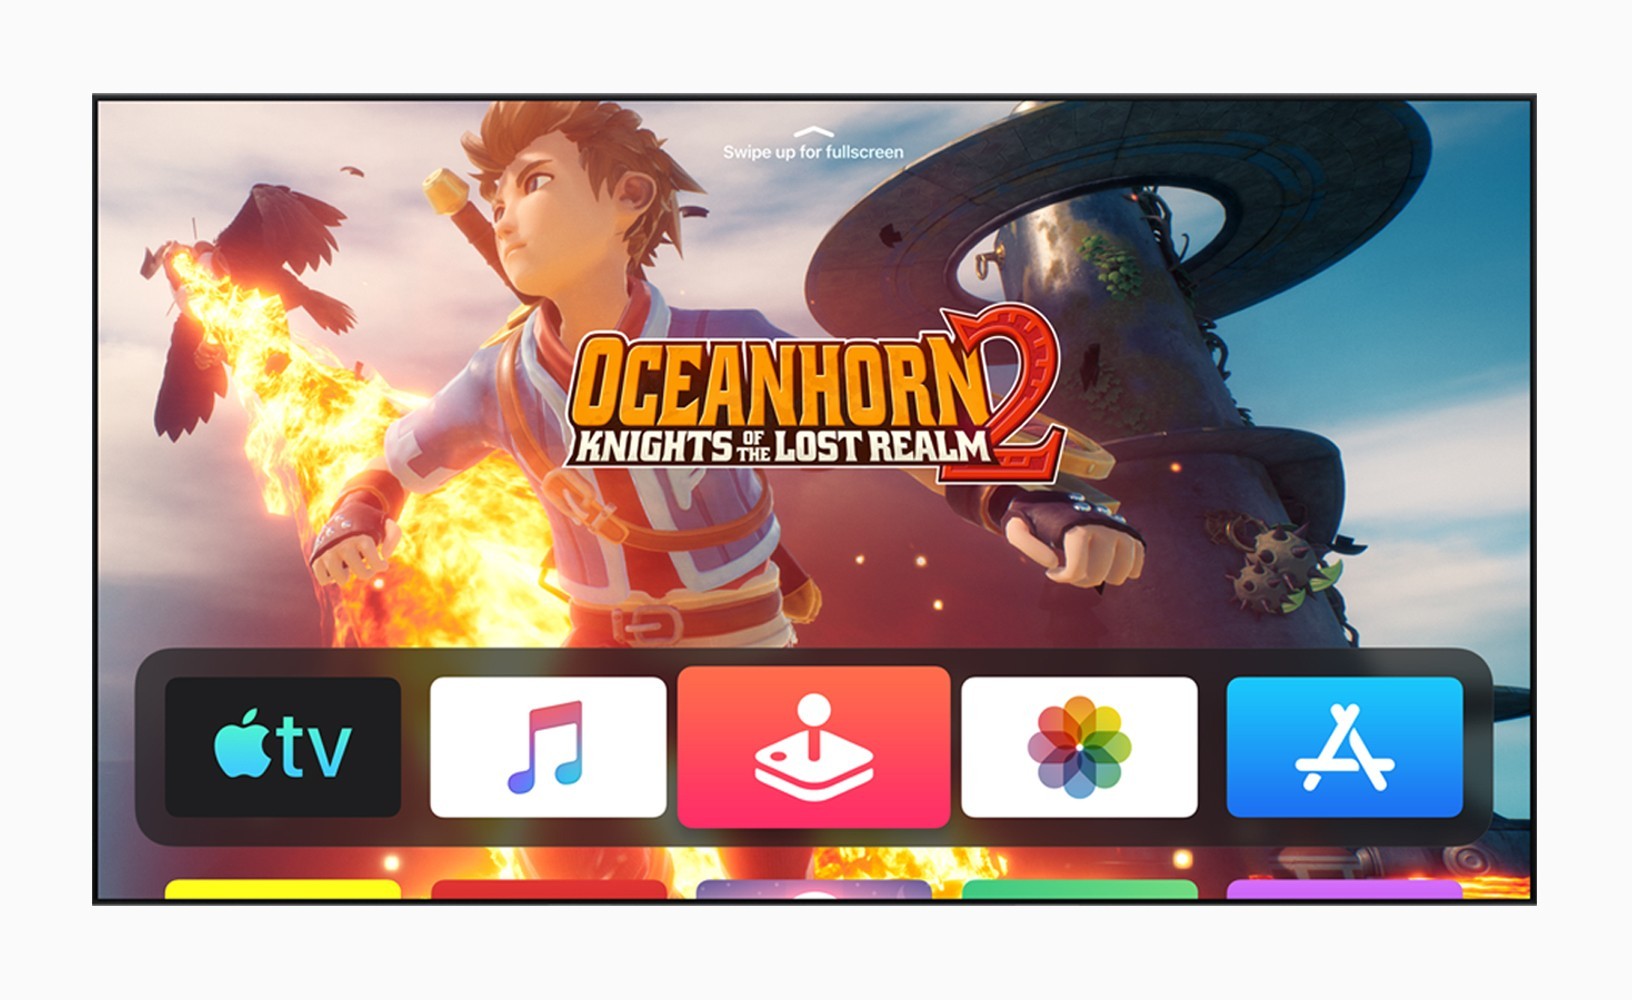 Apple Releases tvOS 13 with Multi-User Support, Controller Support, and More